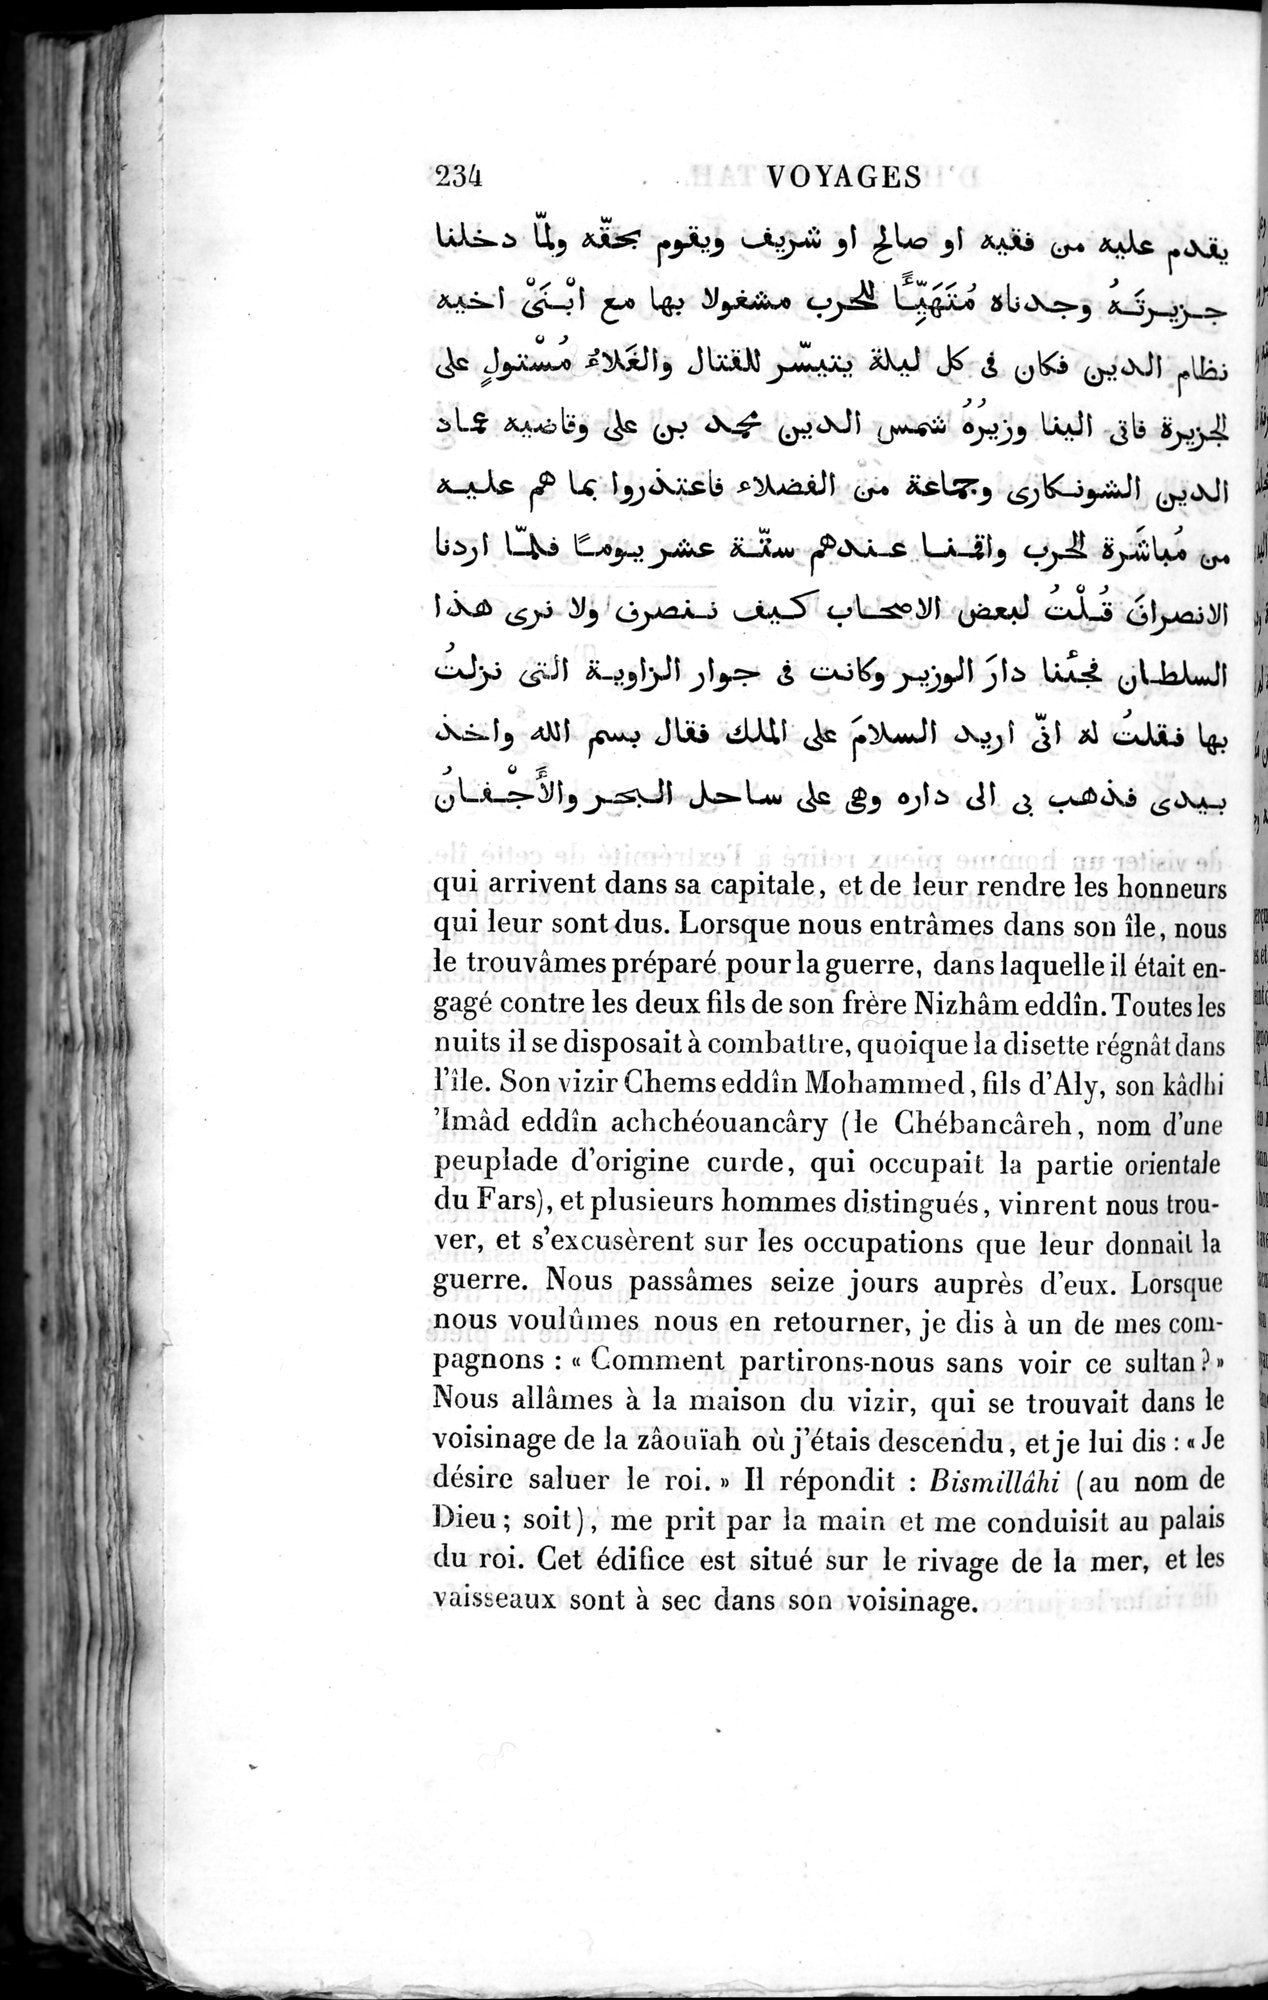 Voyages d'Ibn Batoutah : vol.2 / Page 262 (Grayscale High Resolution Image)